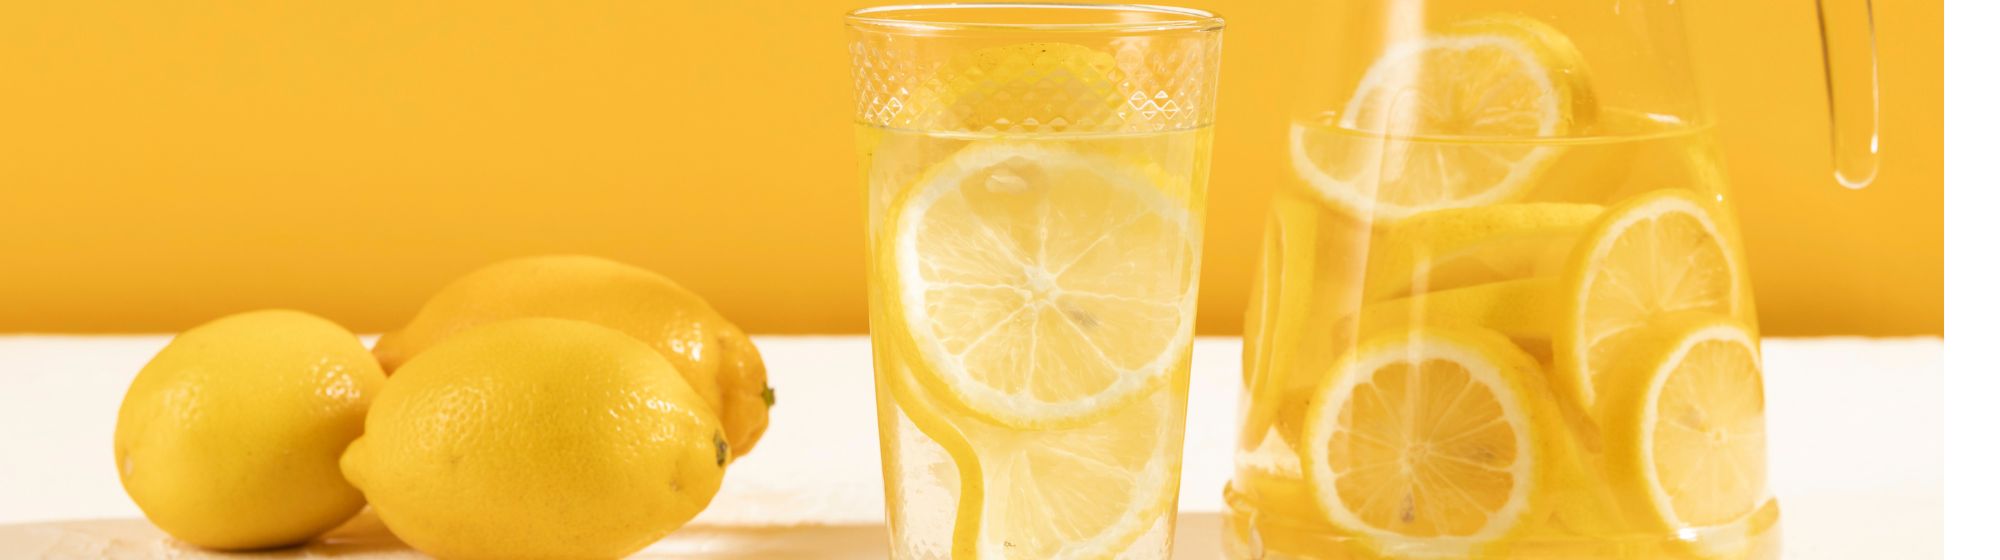 Water with lemon 